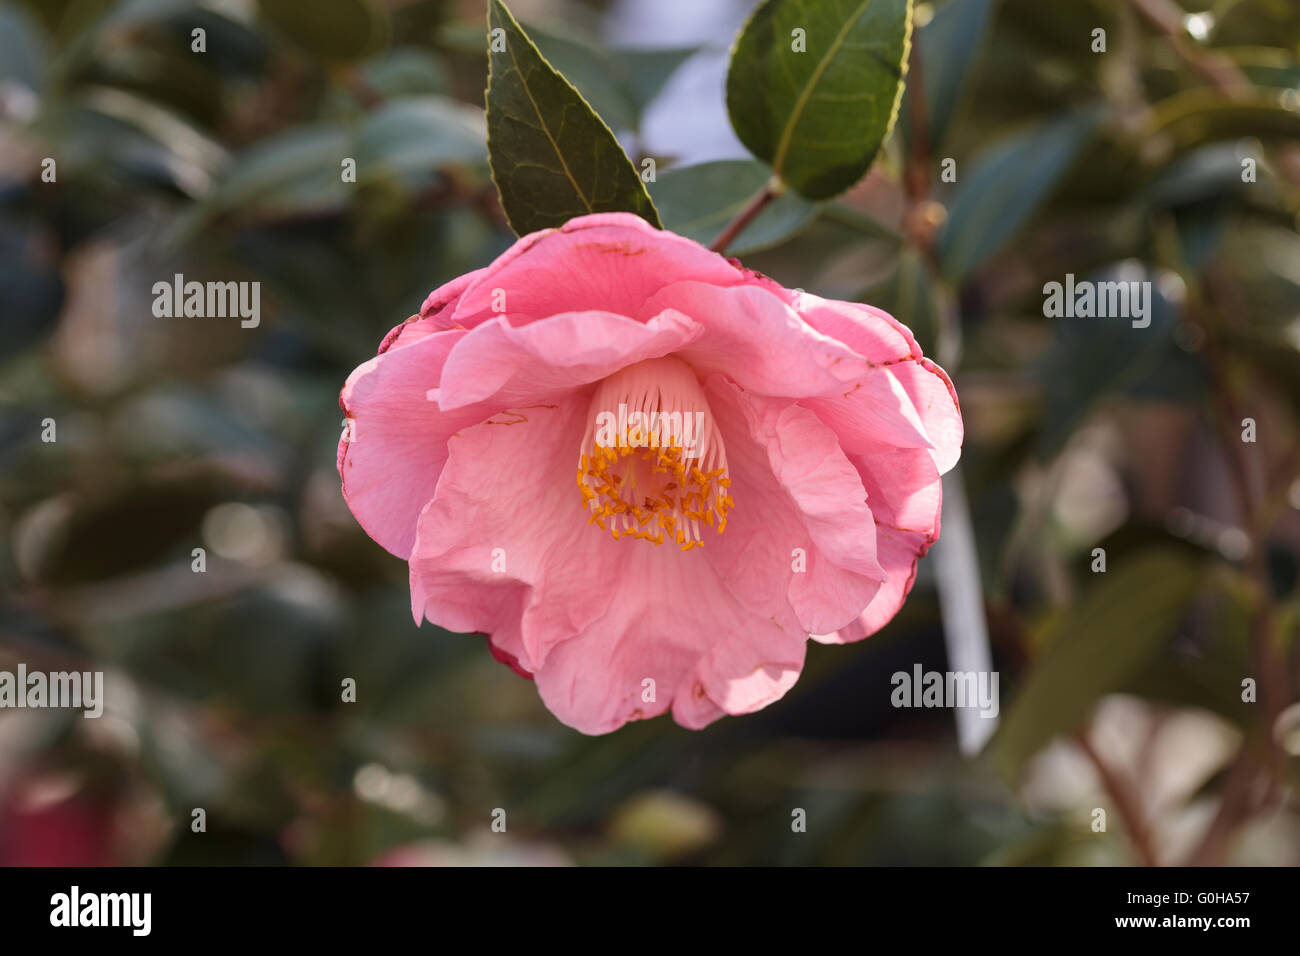 Camellia japonica pink flower Stock Photo